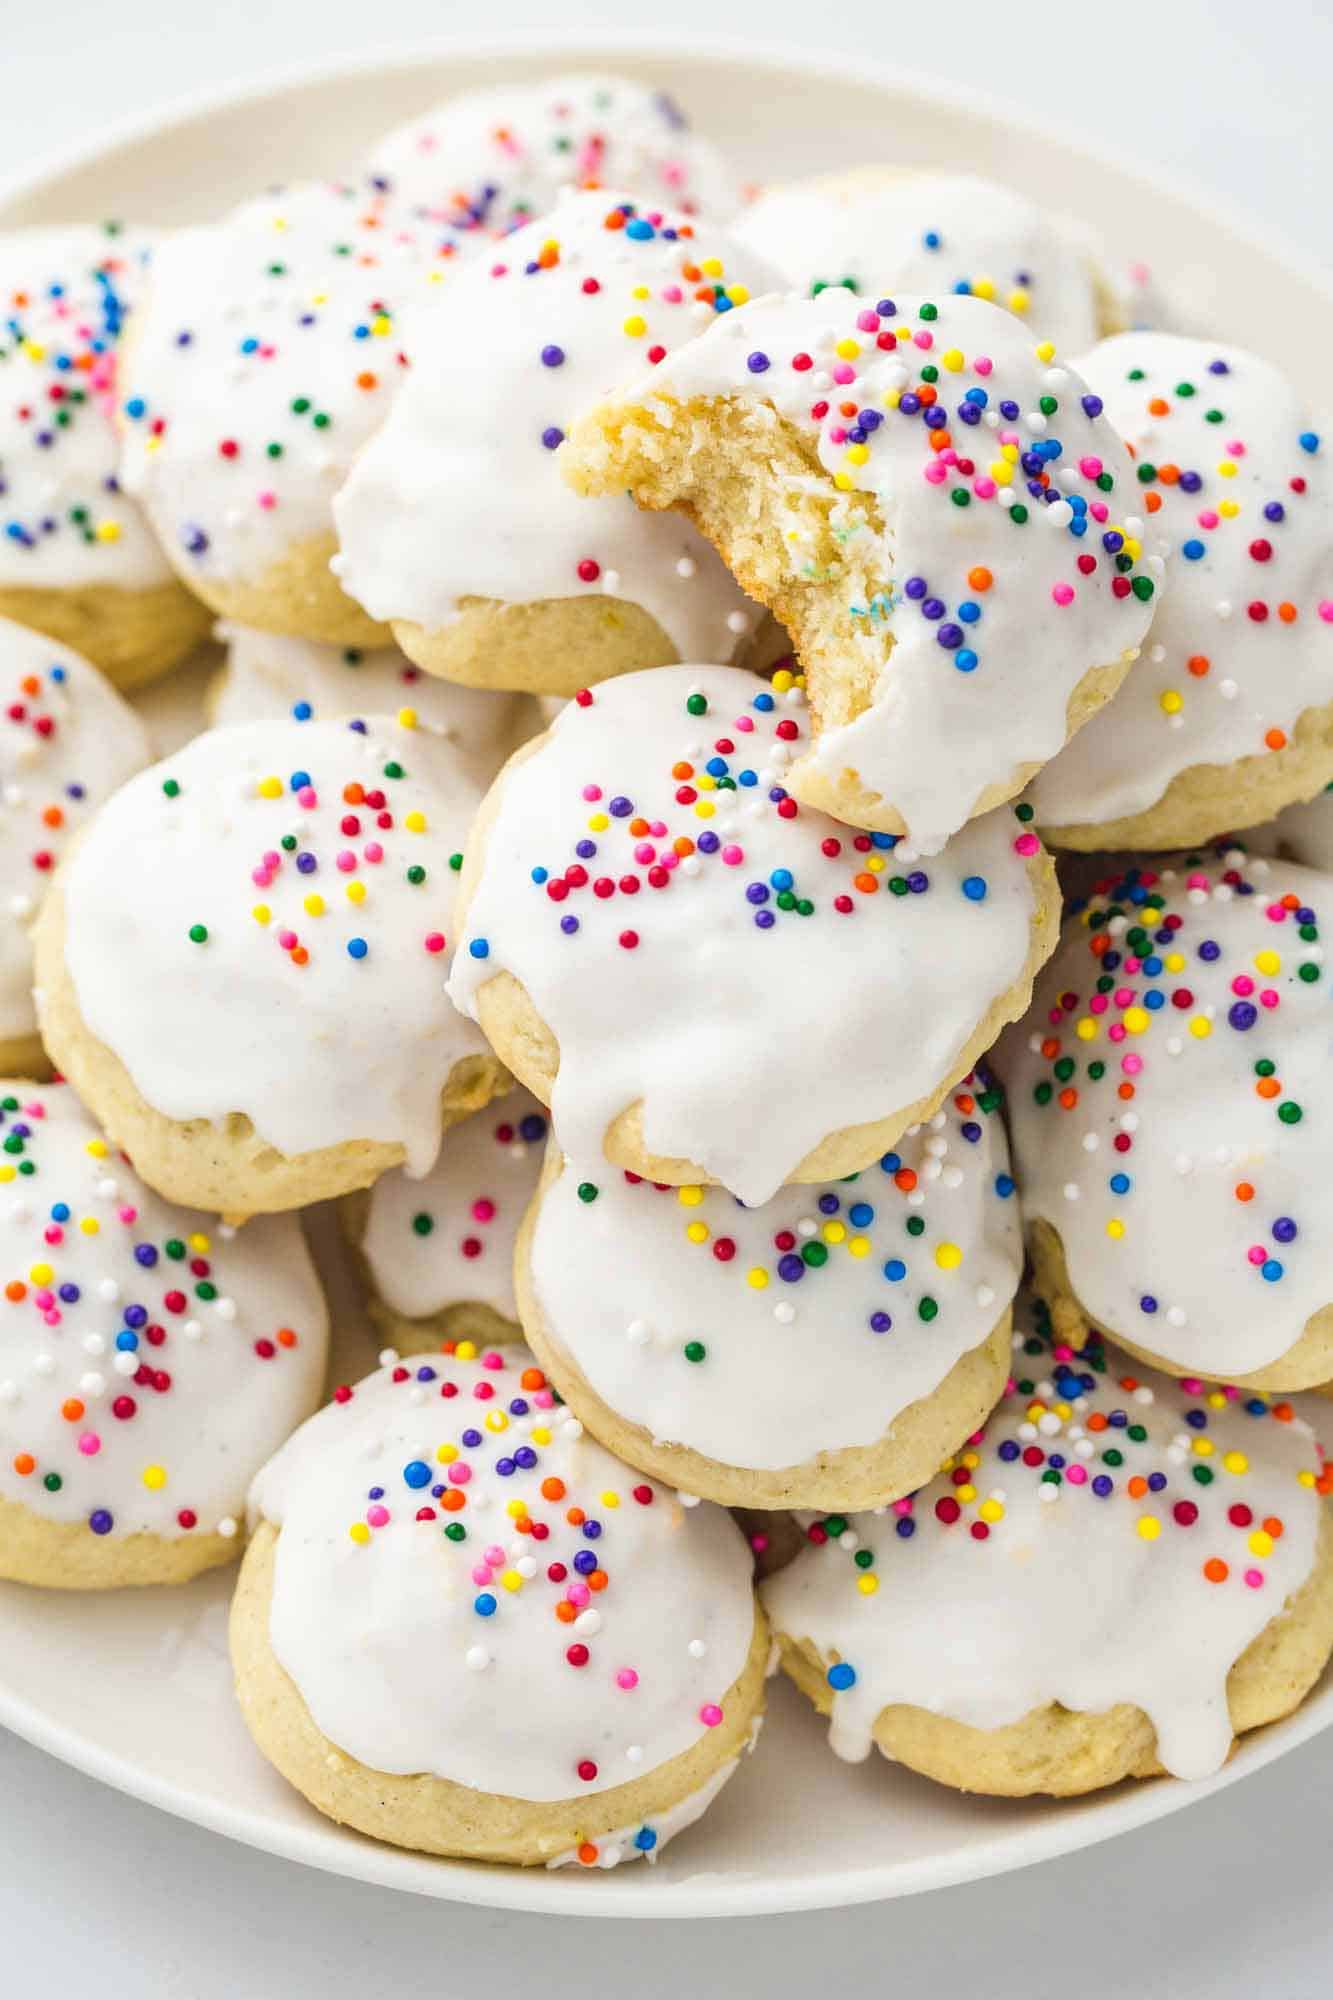 Stacked ricotta cookies on a white plate, decorated with vanilla glaze and colorful sprinkles.